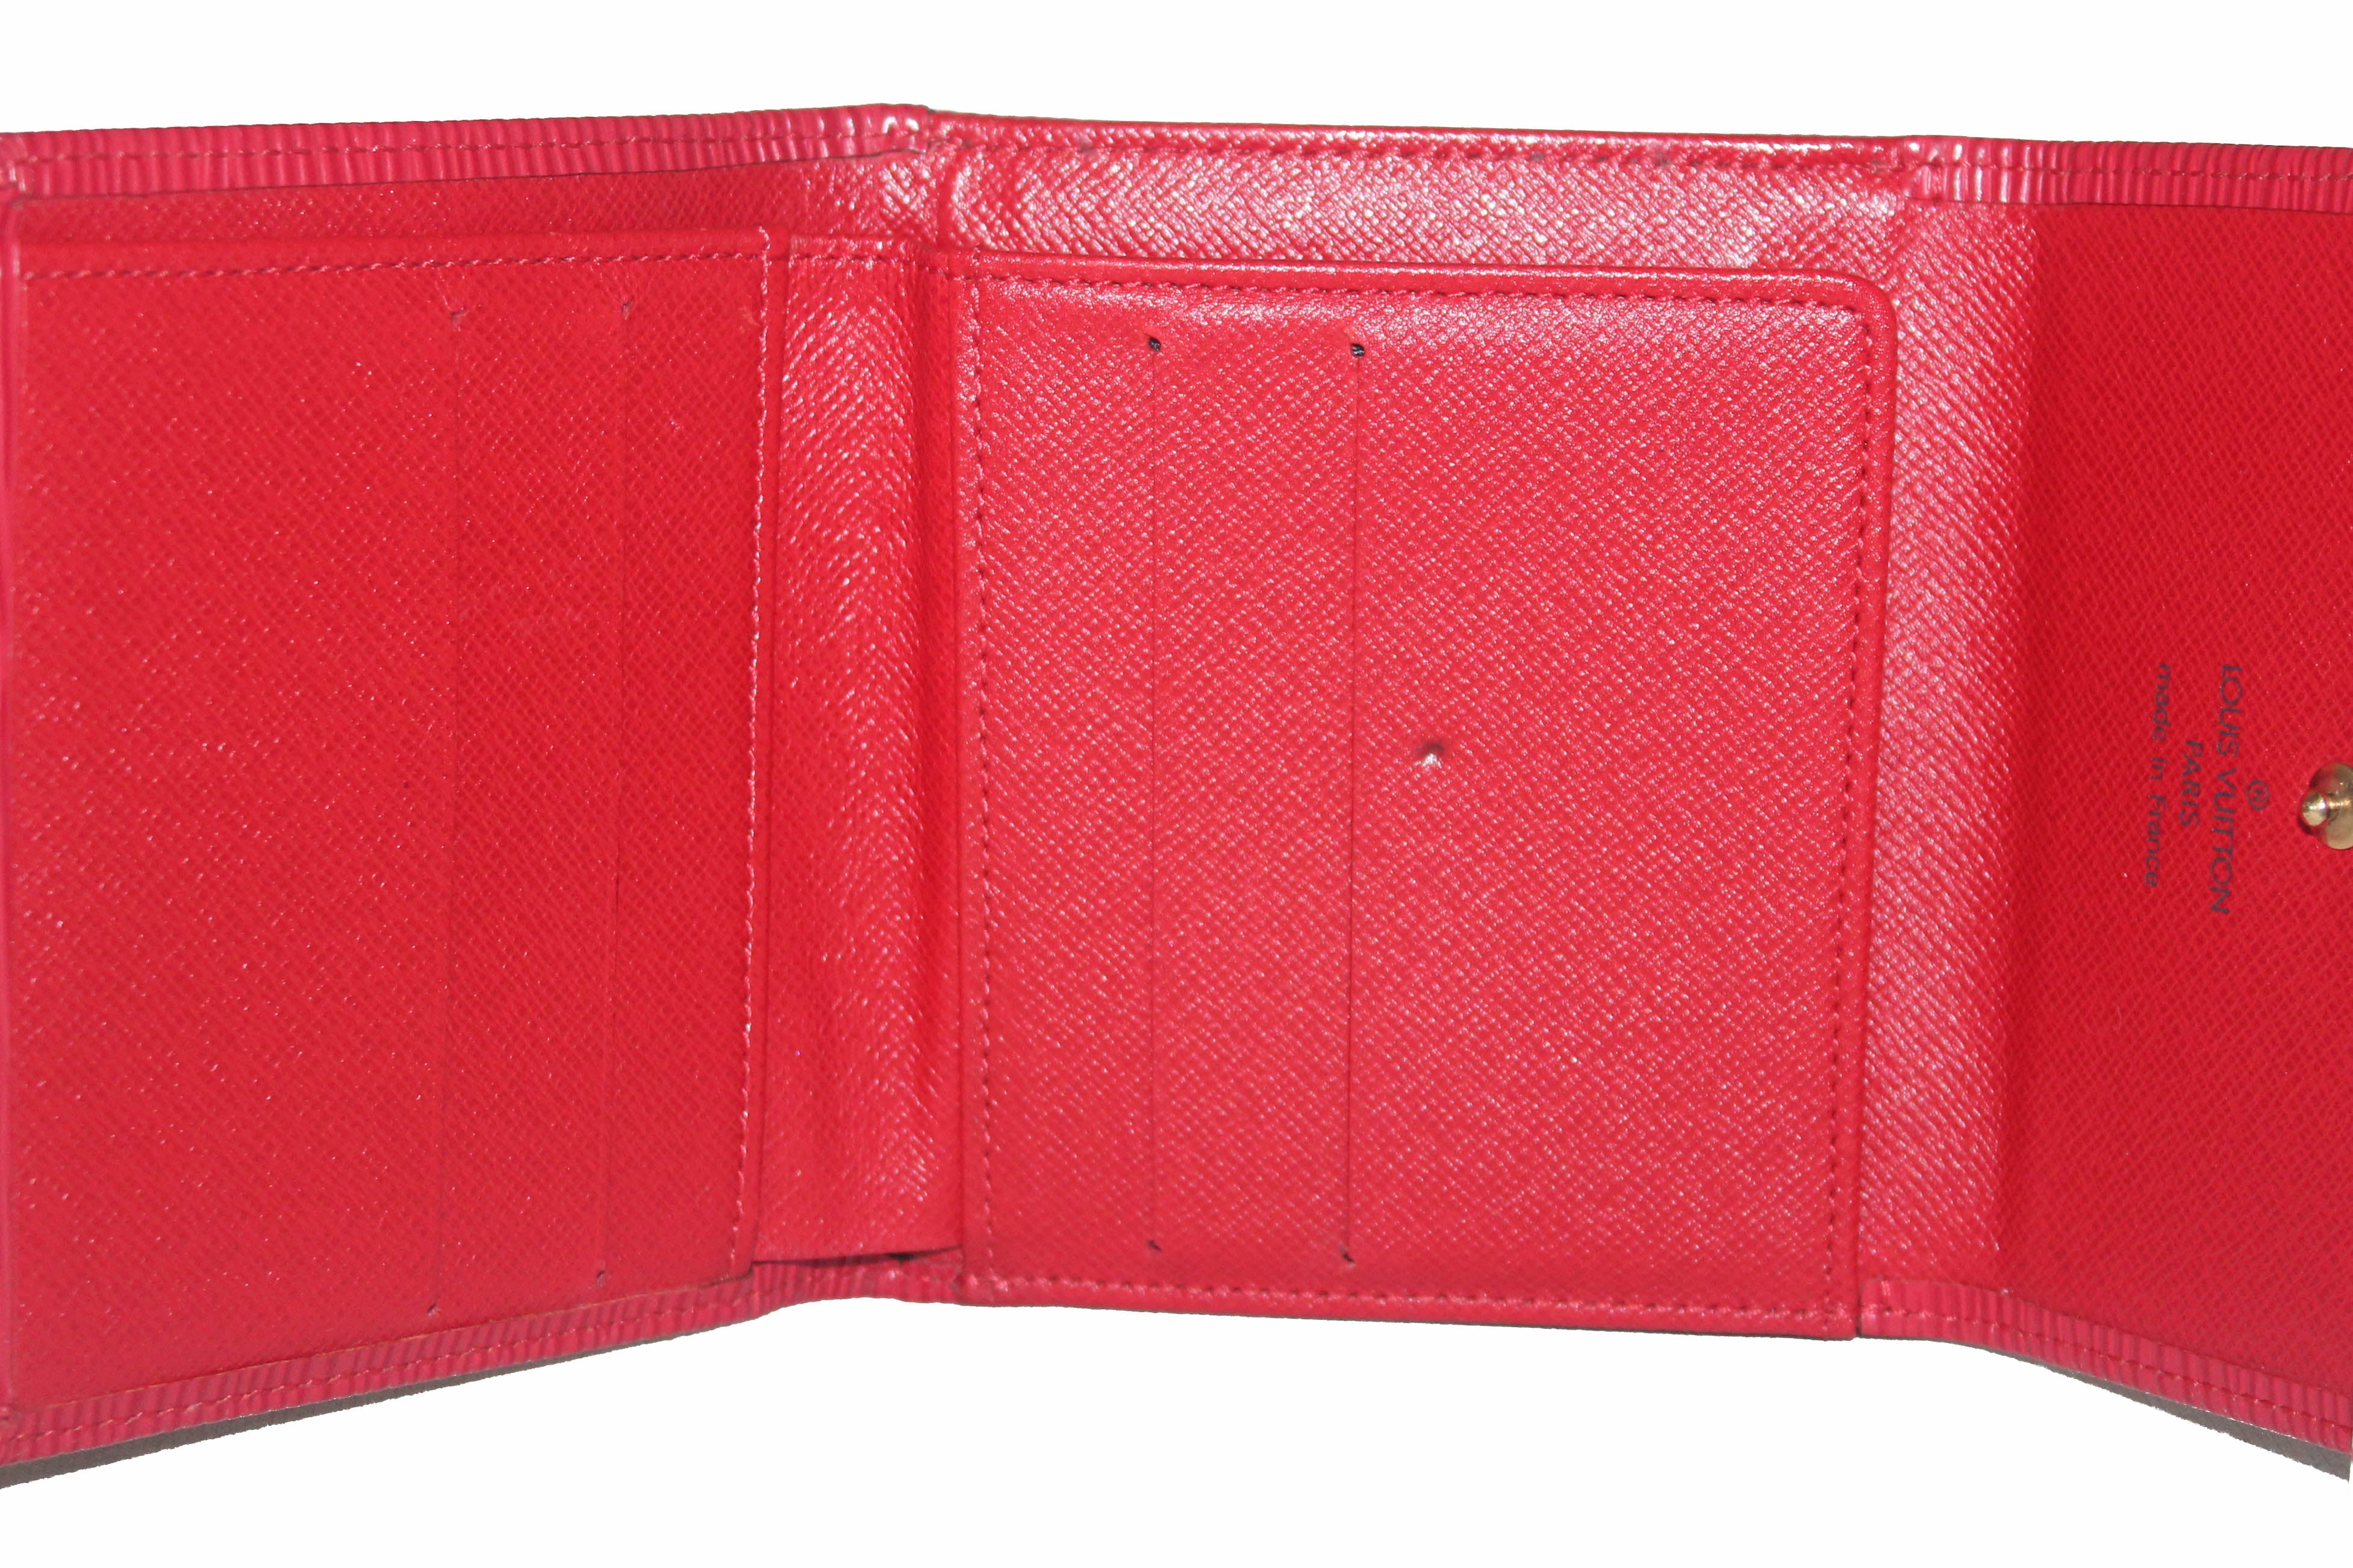 Authentic Louis Vuitton Red Epi Leather Trifold Compact Wallet